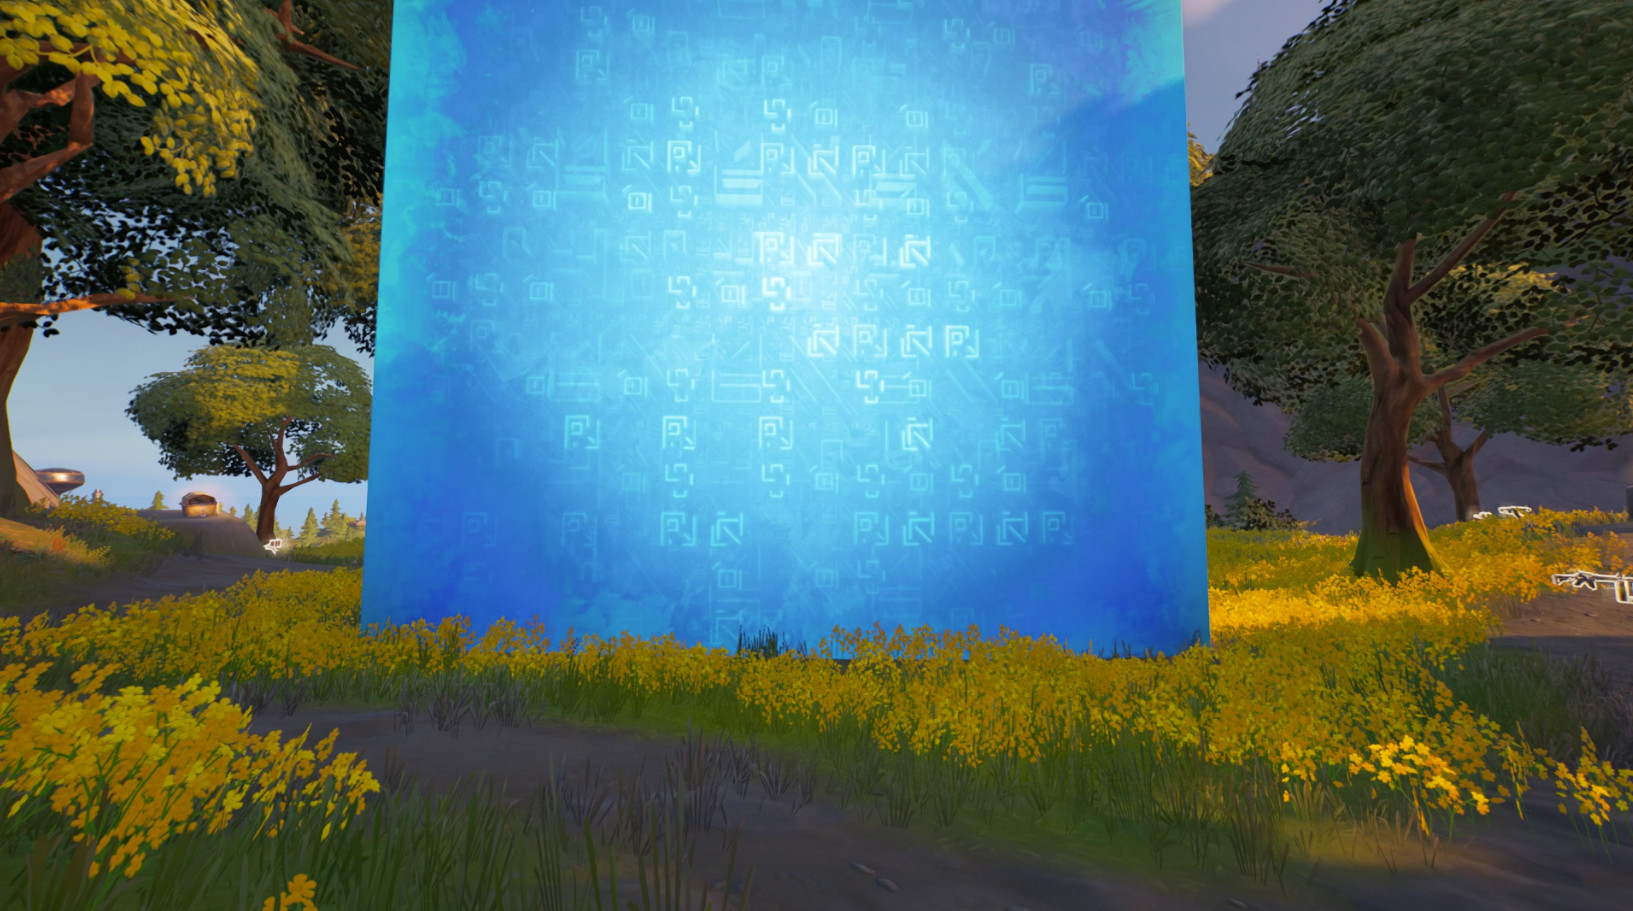 The Blue cube is going to teleport soon! 